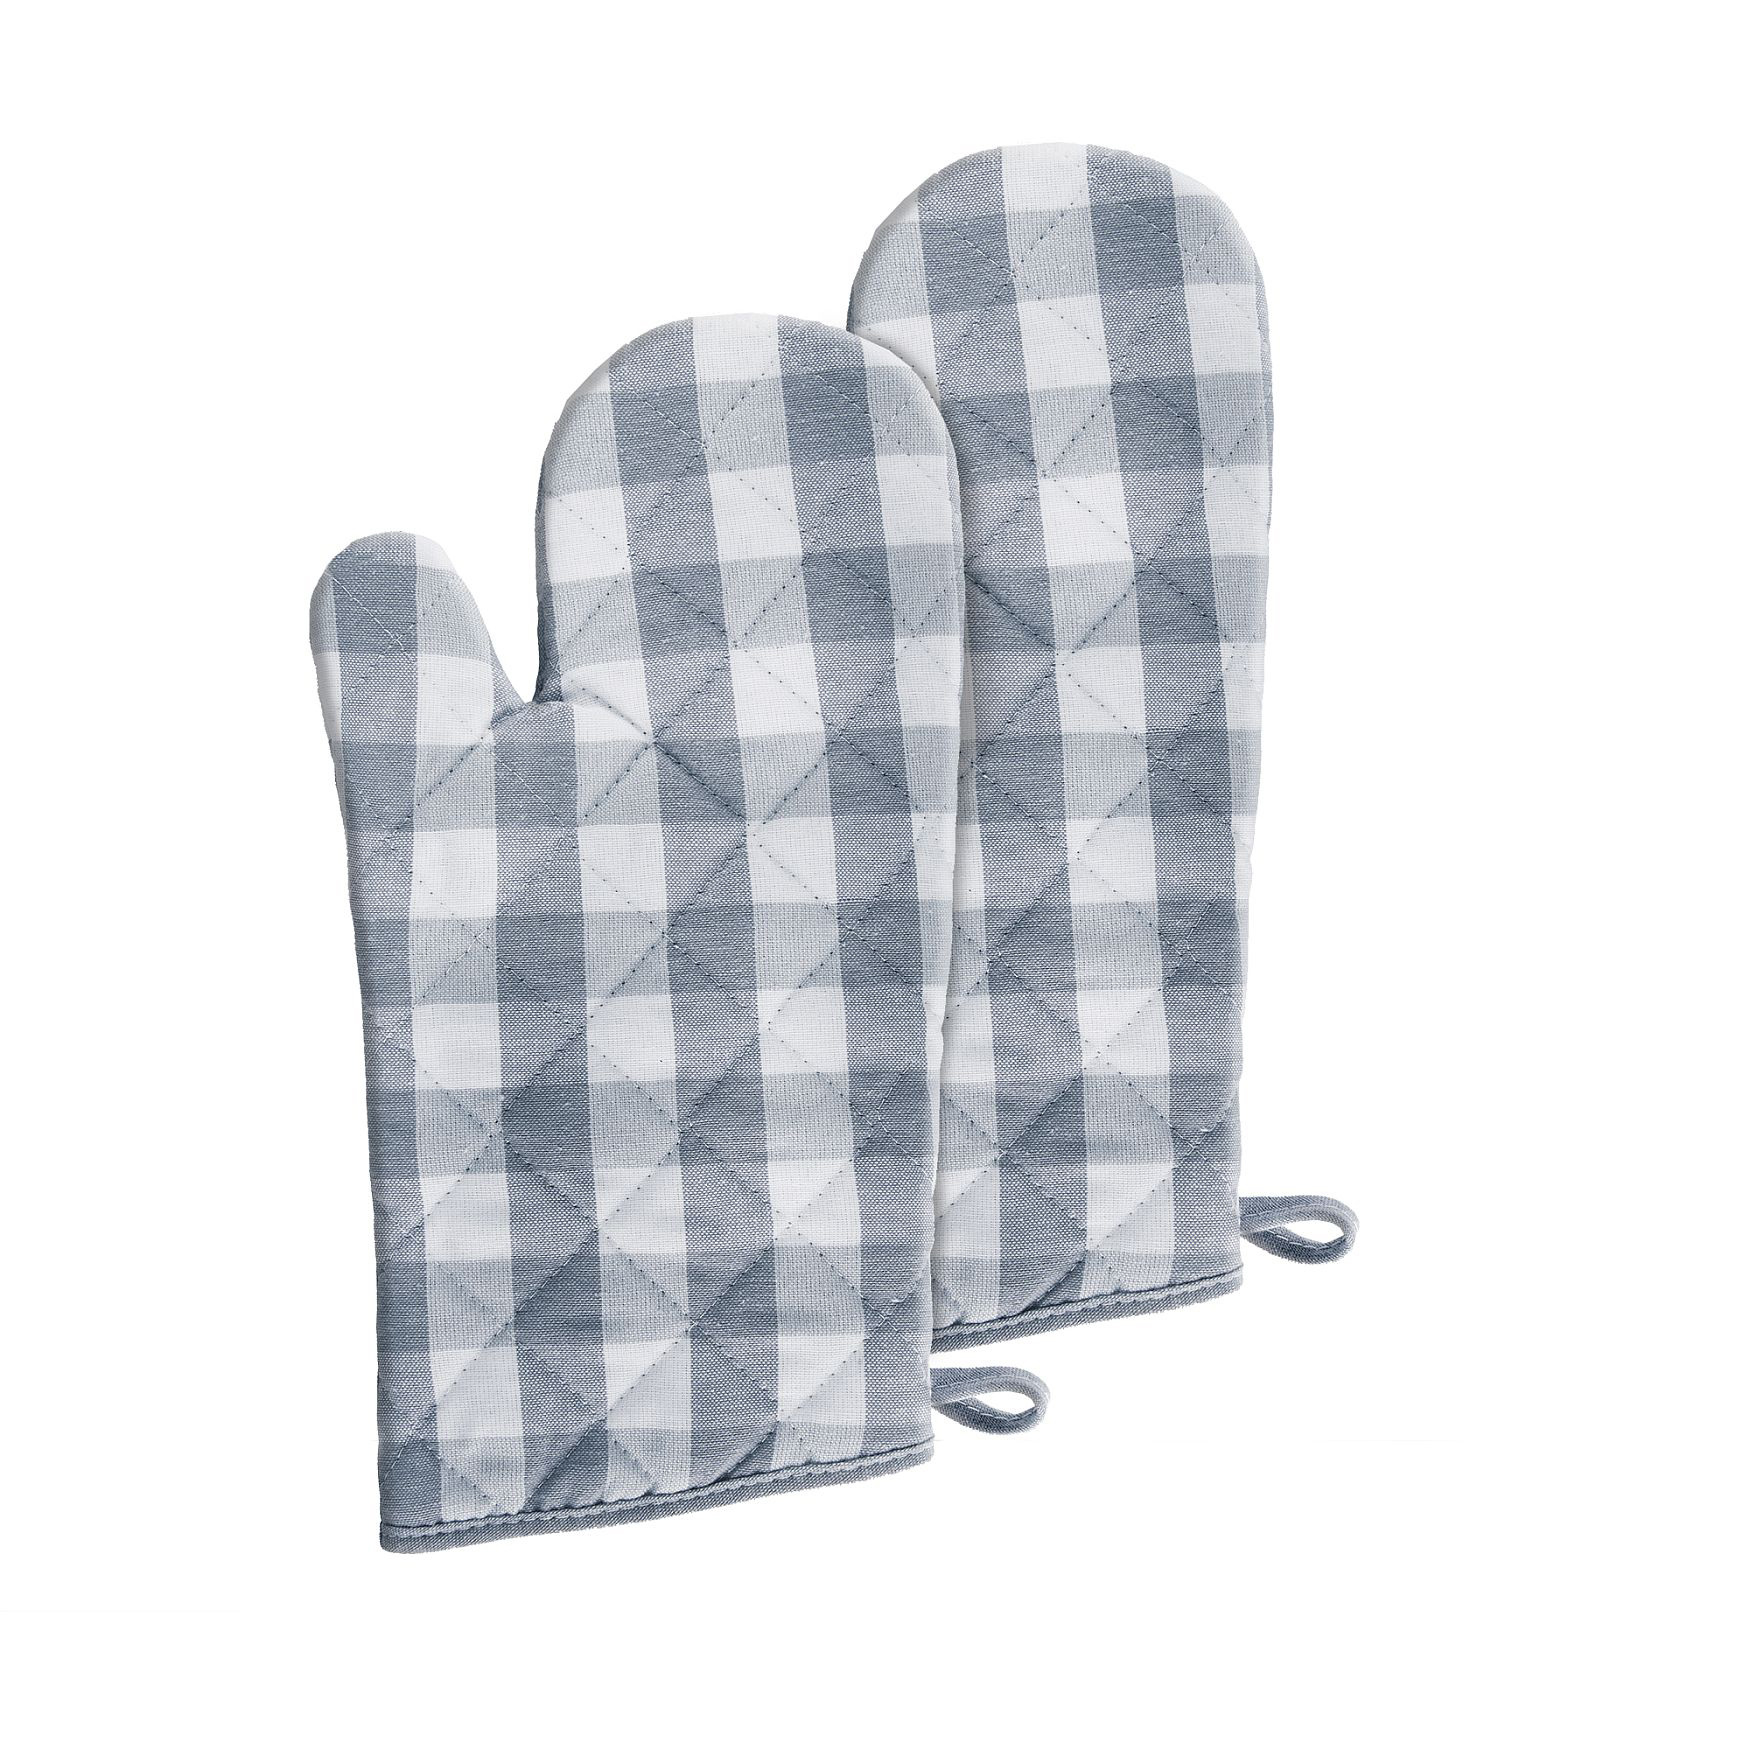 Buffalo Check Oven Mitt 7-in x 13-in - Set of Two, 